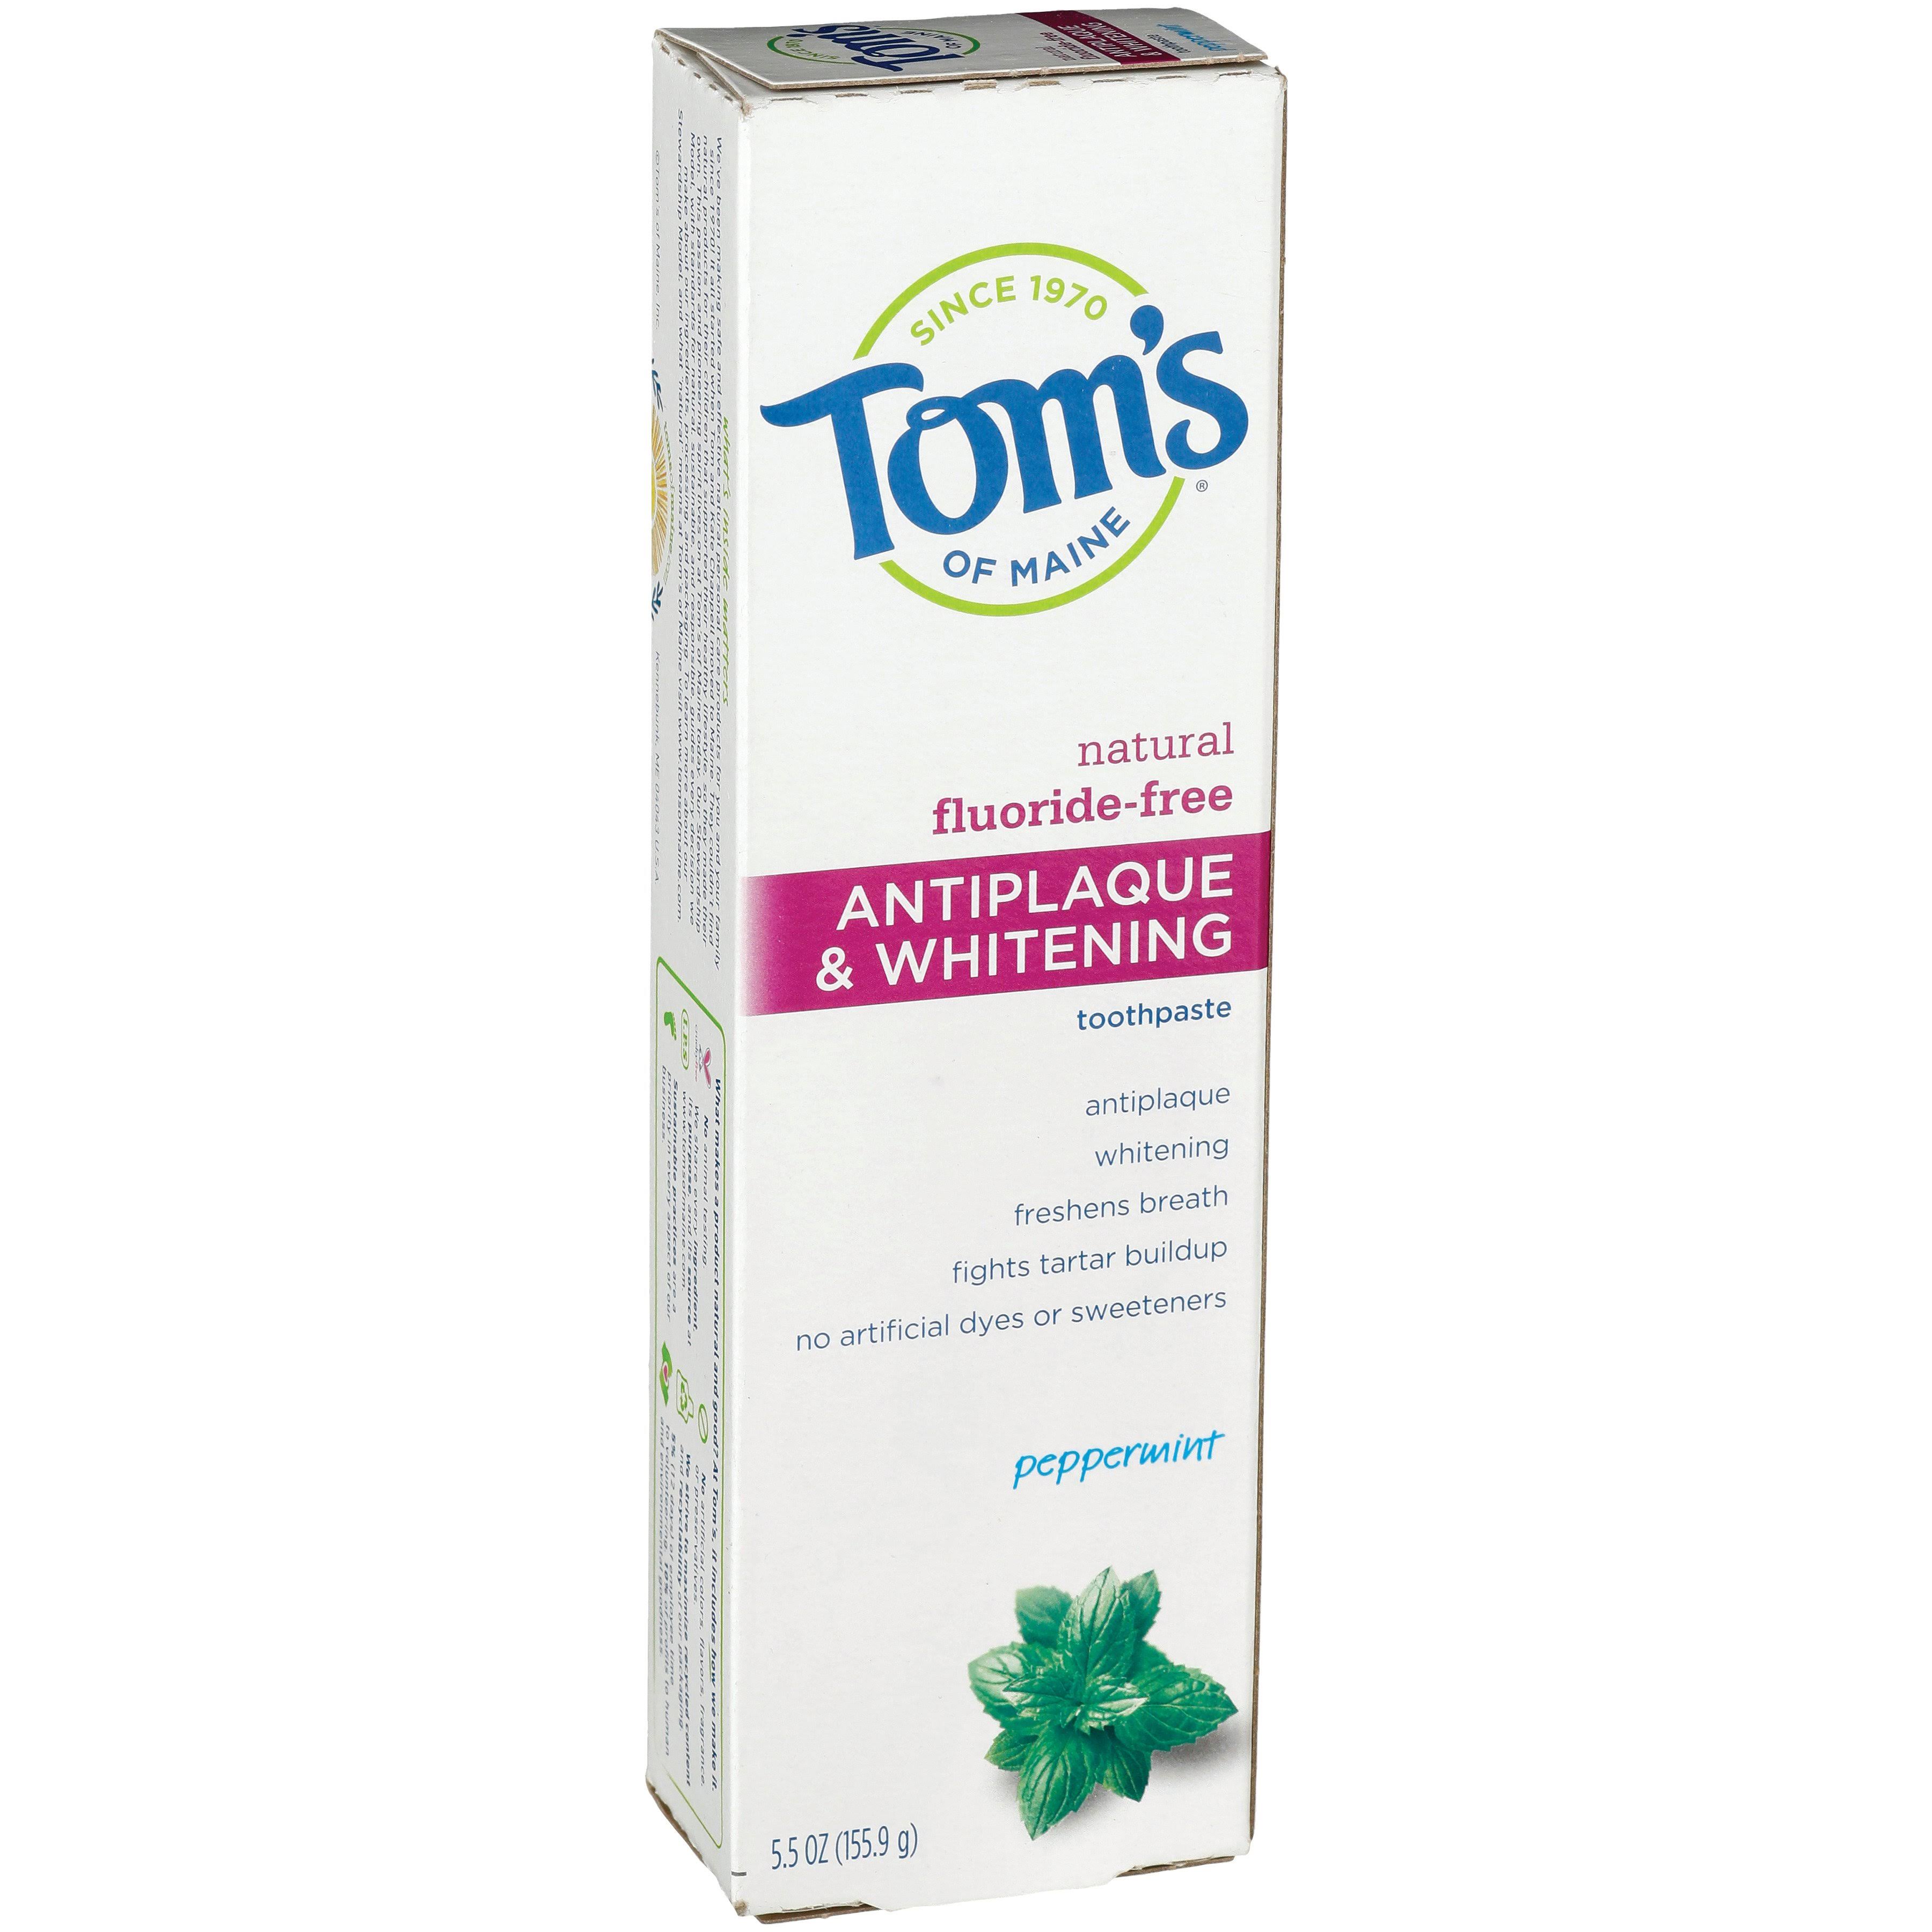 Tom's of Maine Fluoride Free Antiplaque and Whitening Natural Toothpaste - Peppermint, 5.5oz